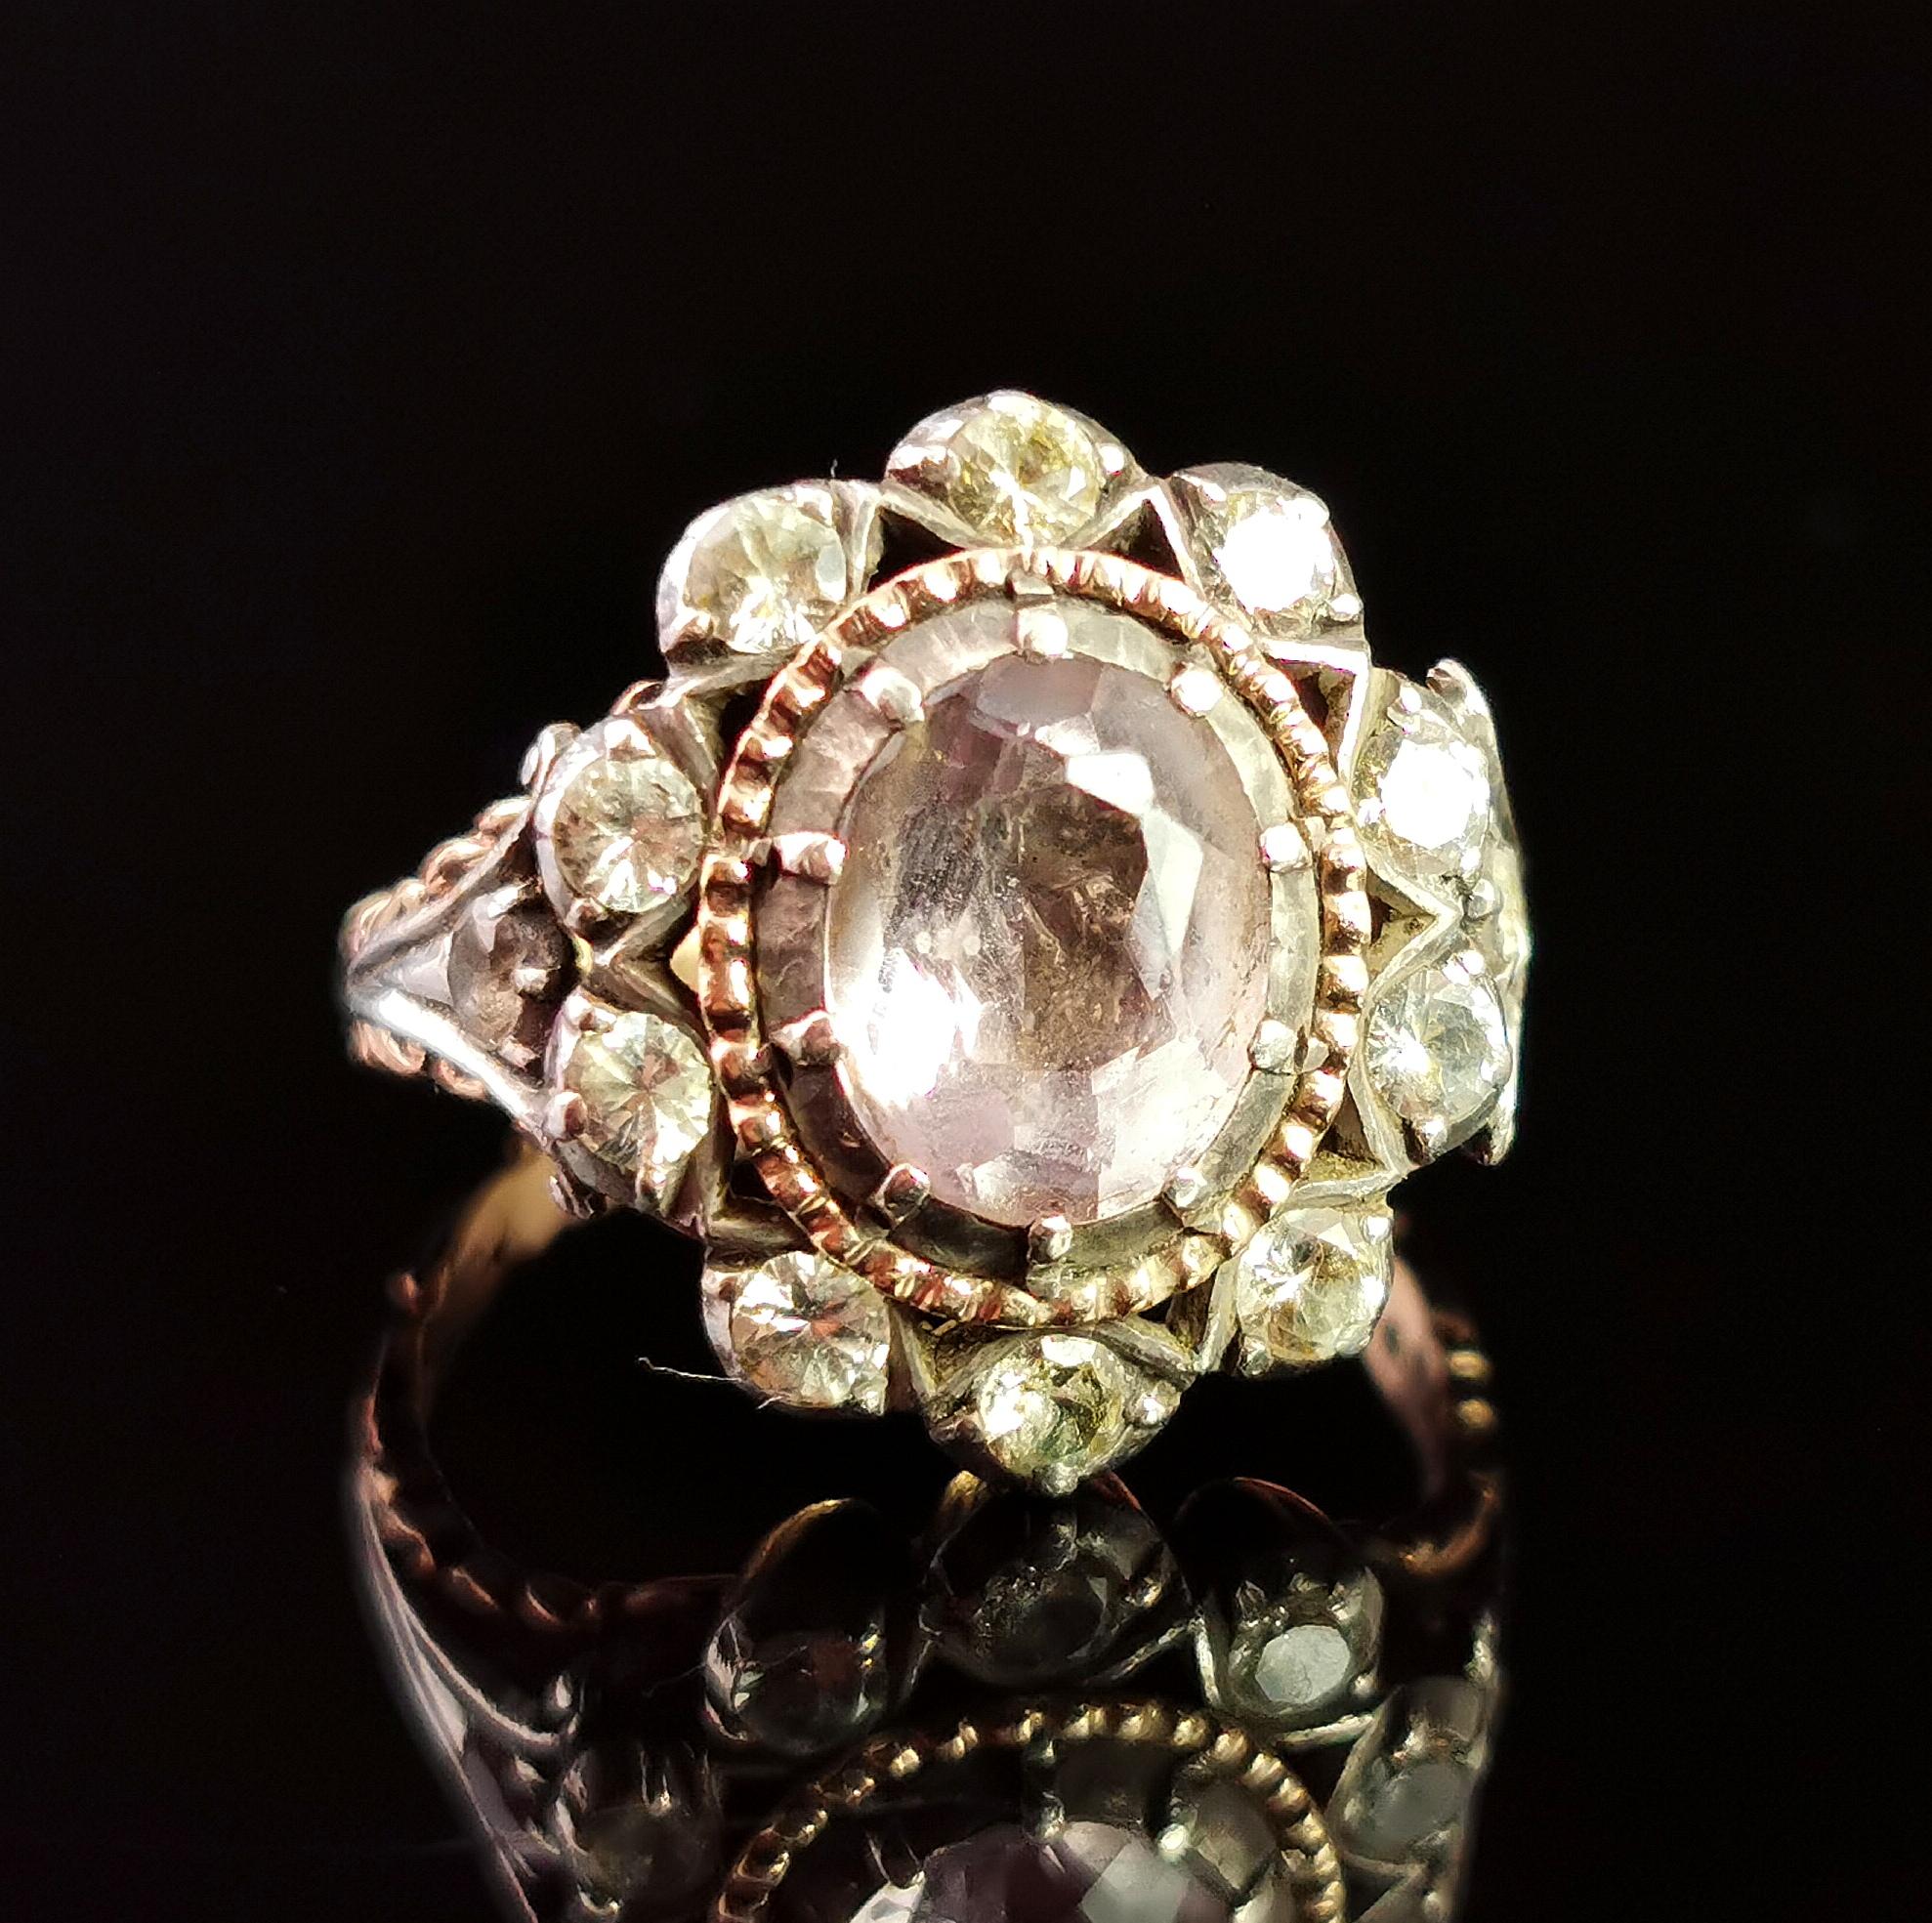 A stunning antique Georgian era pink topaz and paste cluster ring.

This is a very grand ring with a huge oval cut light pink topaz to the centre surrounded by a gold bezel frame and a halo of sparkling old cut paste stones in a floral design.

The